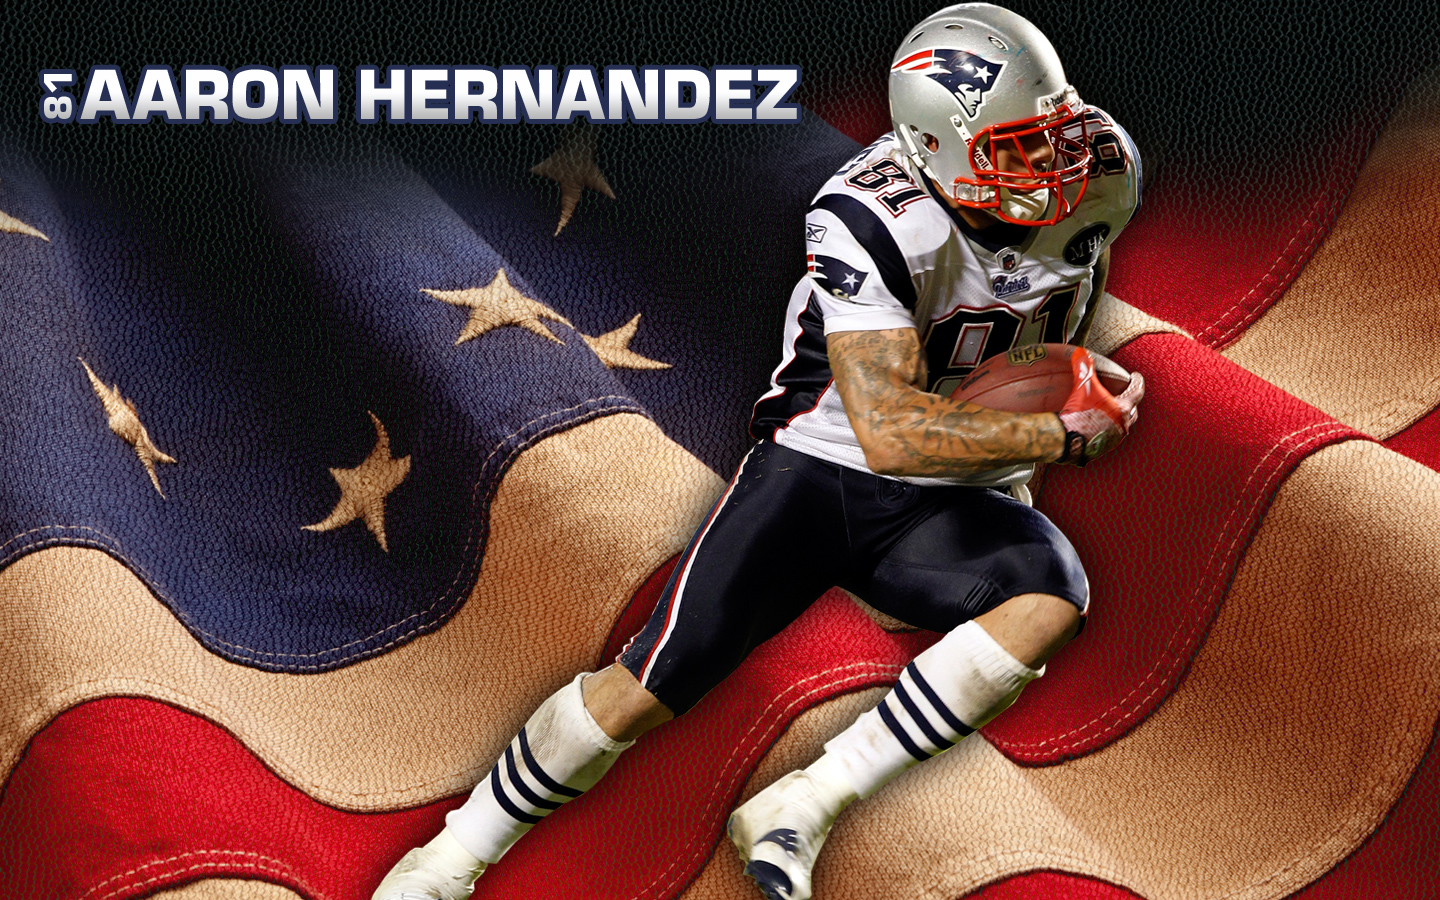 New New England Patriots background New England Patriots wallpapers